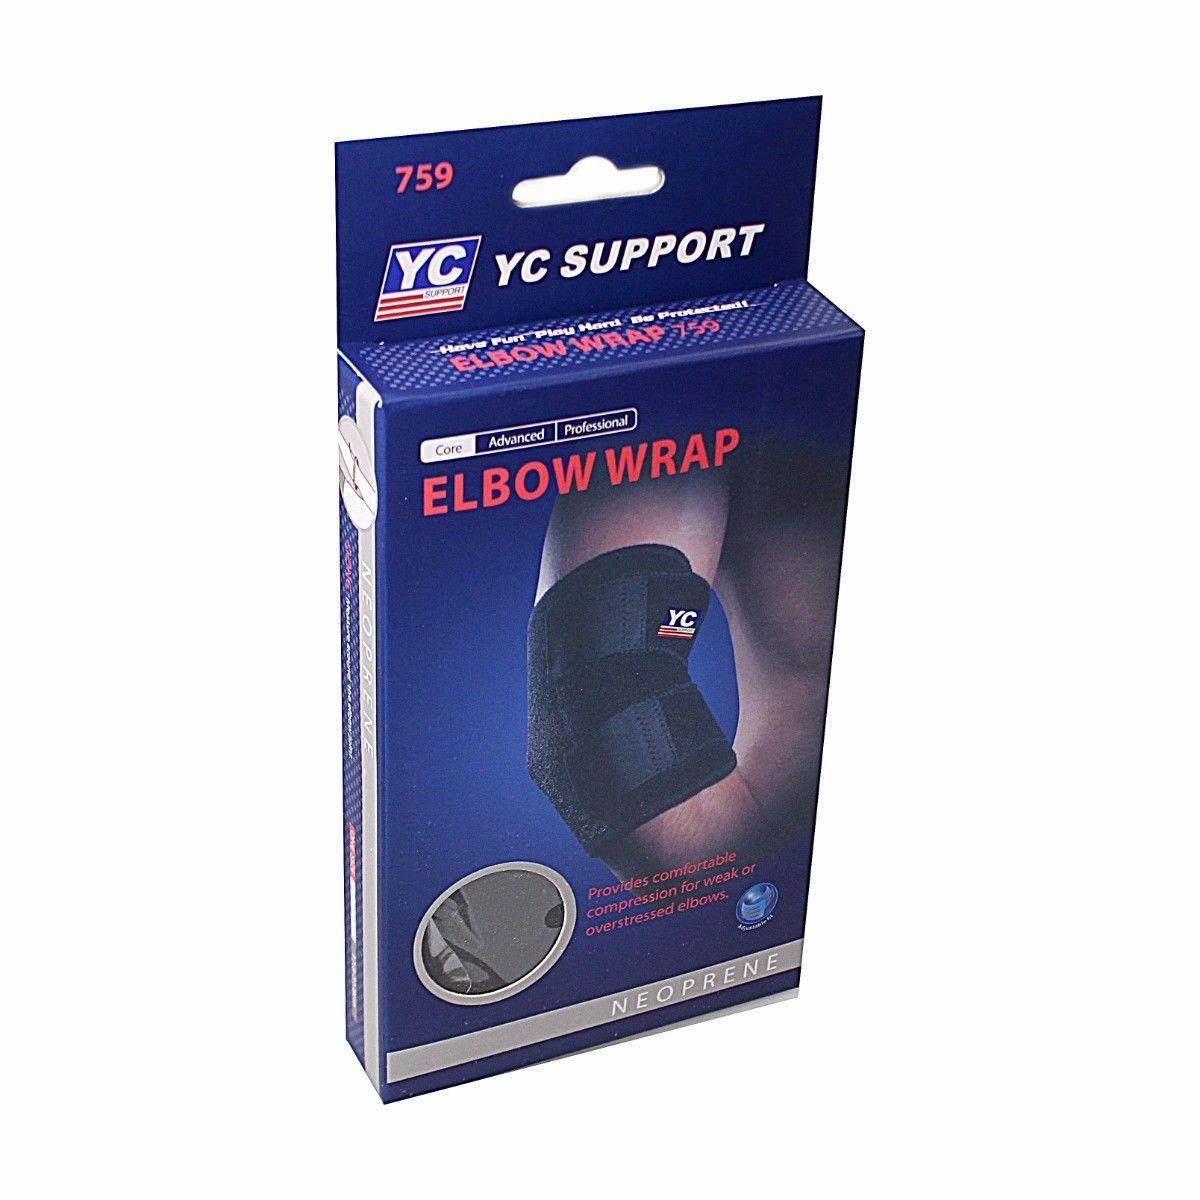 YC Support Core Elbow Support Wrap One Size 9990 / 9997 (Large Letter Rate)